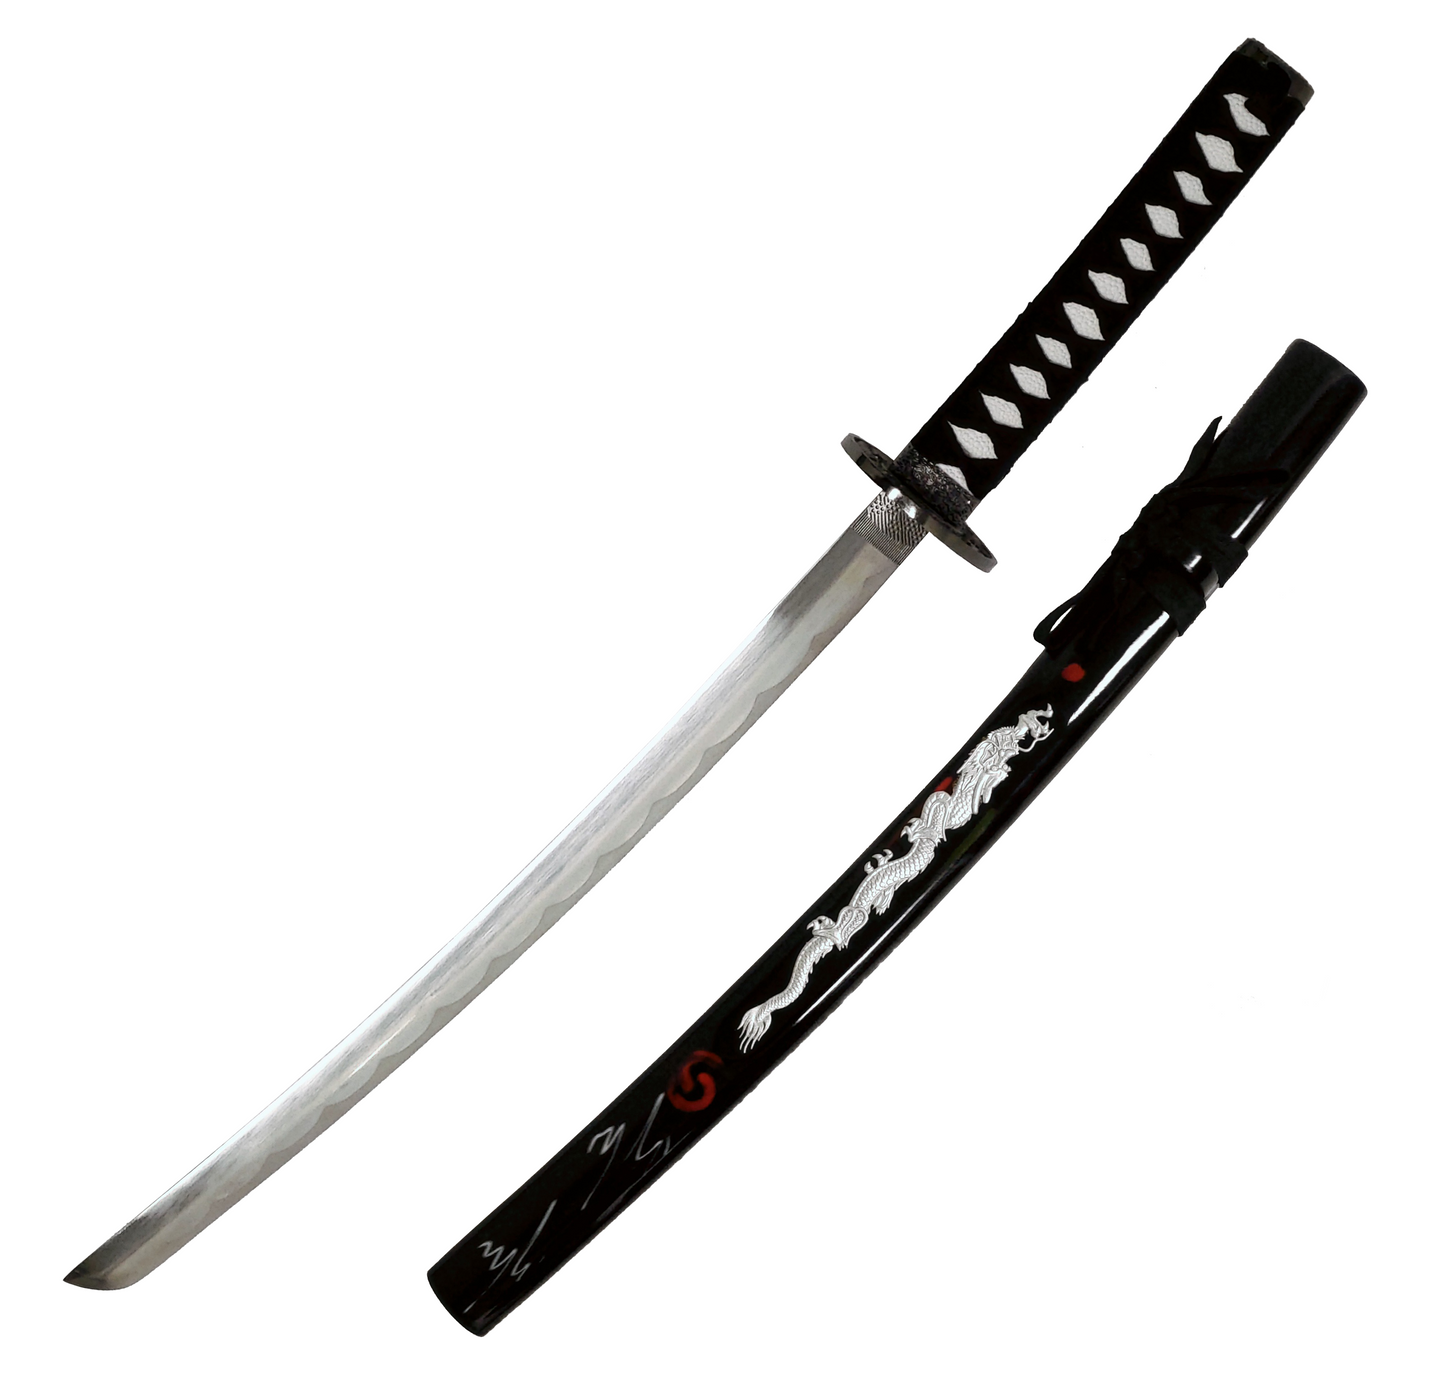 DUAL HOLOGRAPHIC SILVER FIGHTING DRAGON BLACK KATANA DOUBLE SWORD SET WITH STAND